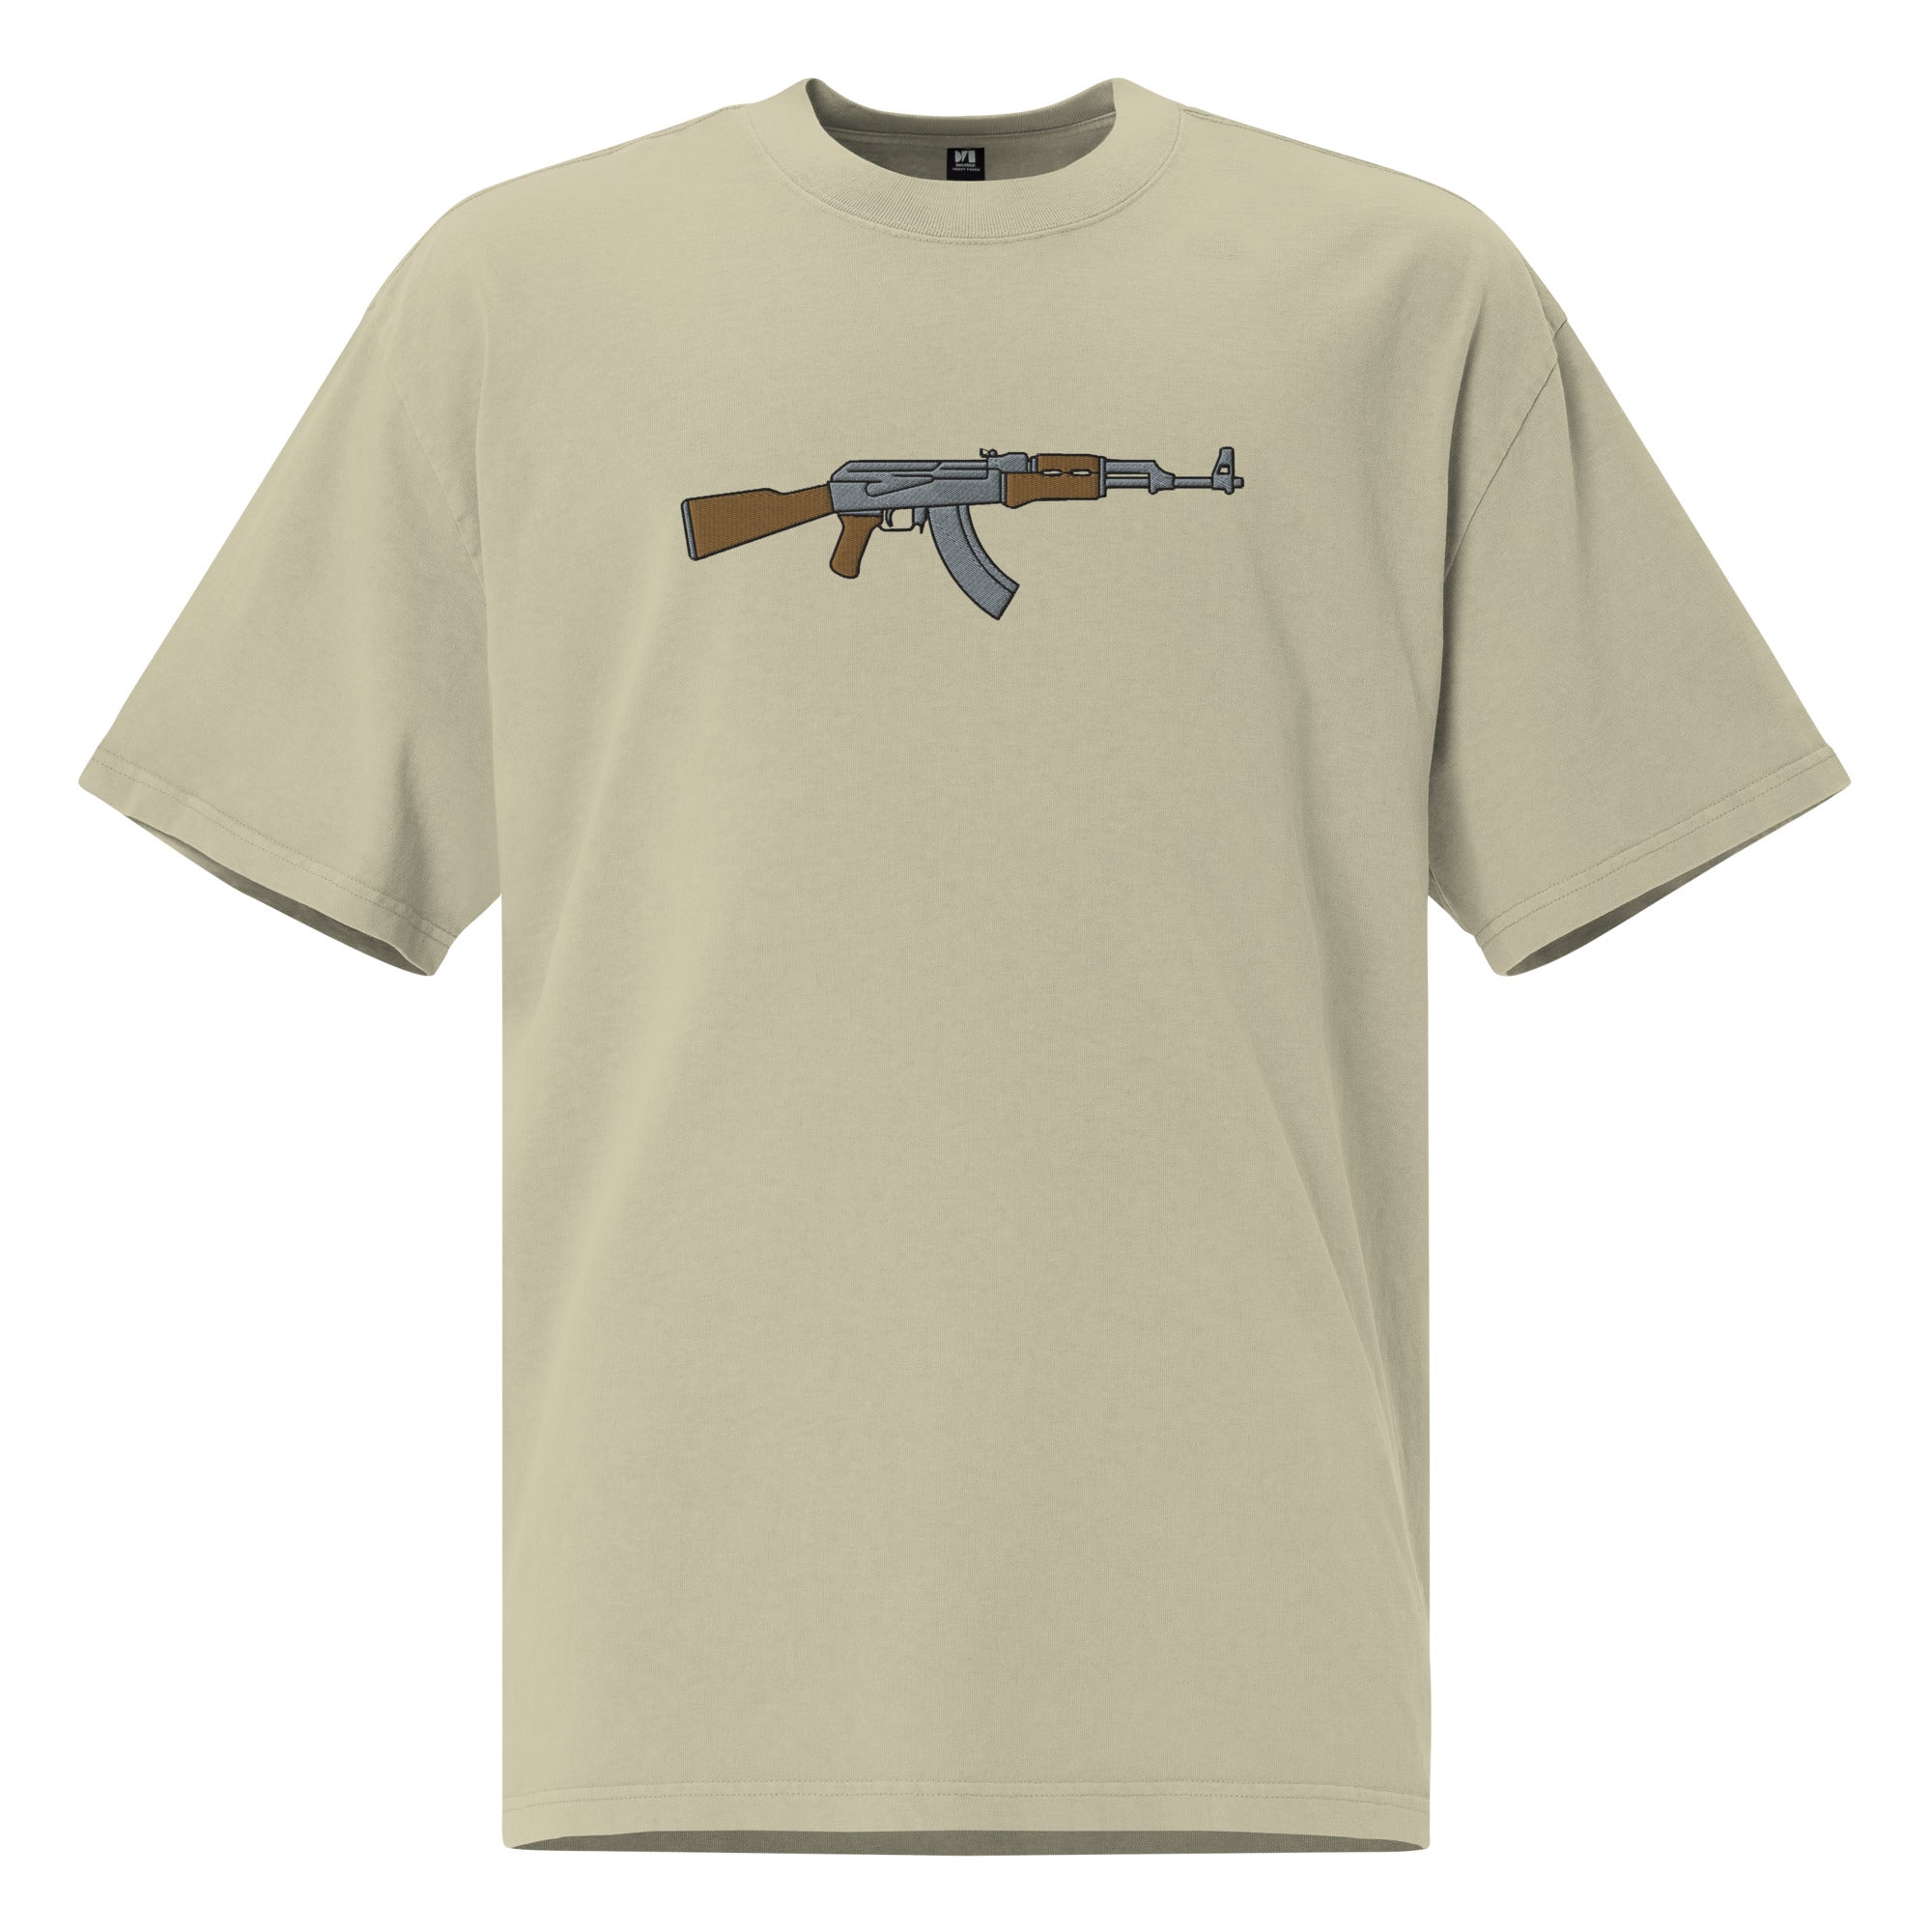 AK47 Embroidered Oversized Faded T-Shirt